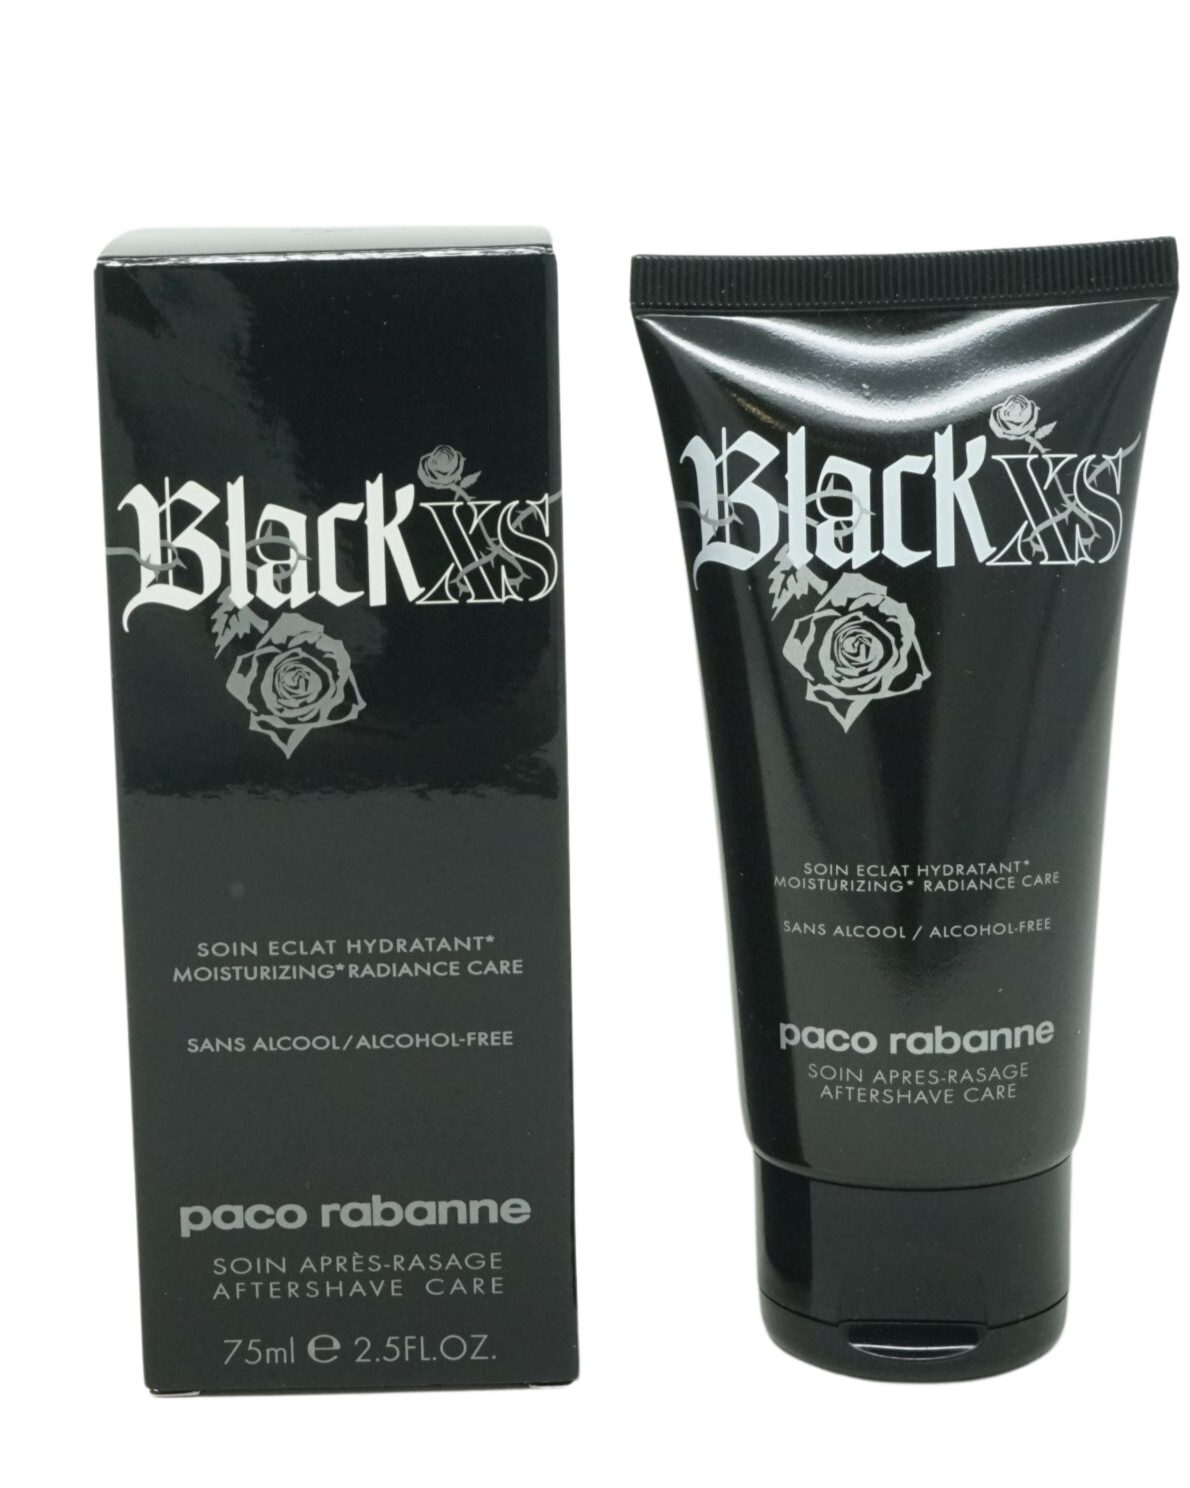 paco rabanne After-Shave Balsam Paco Rabanne Black XS After Shave Balm / Care 75ml